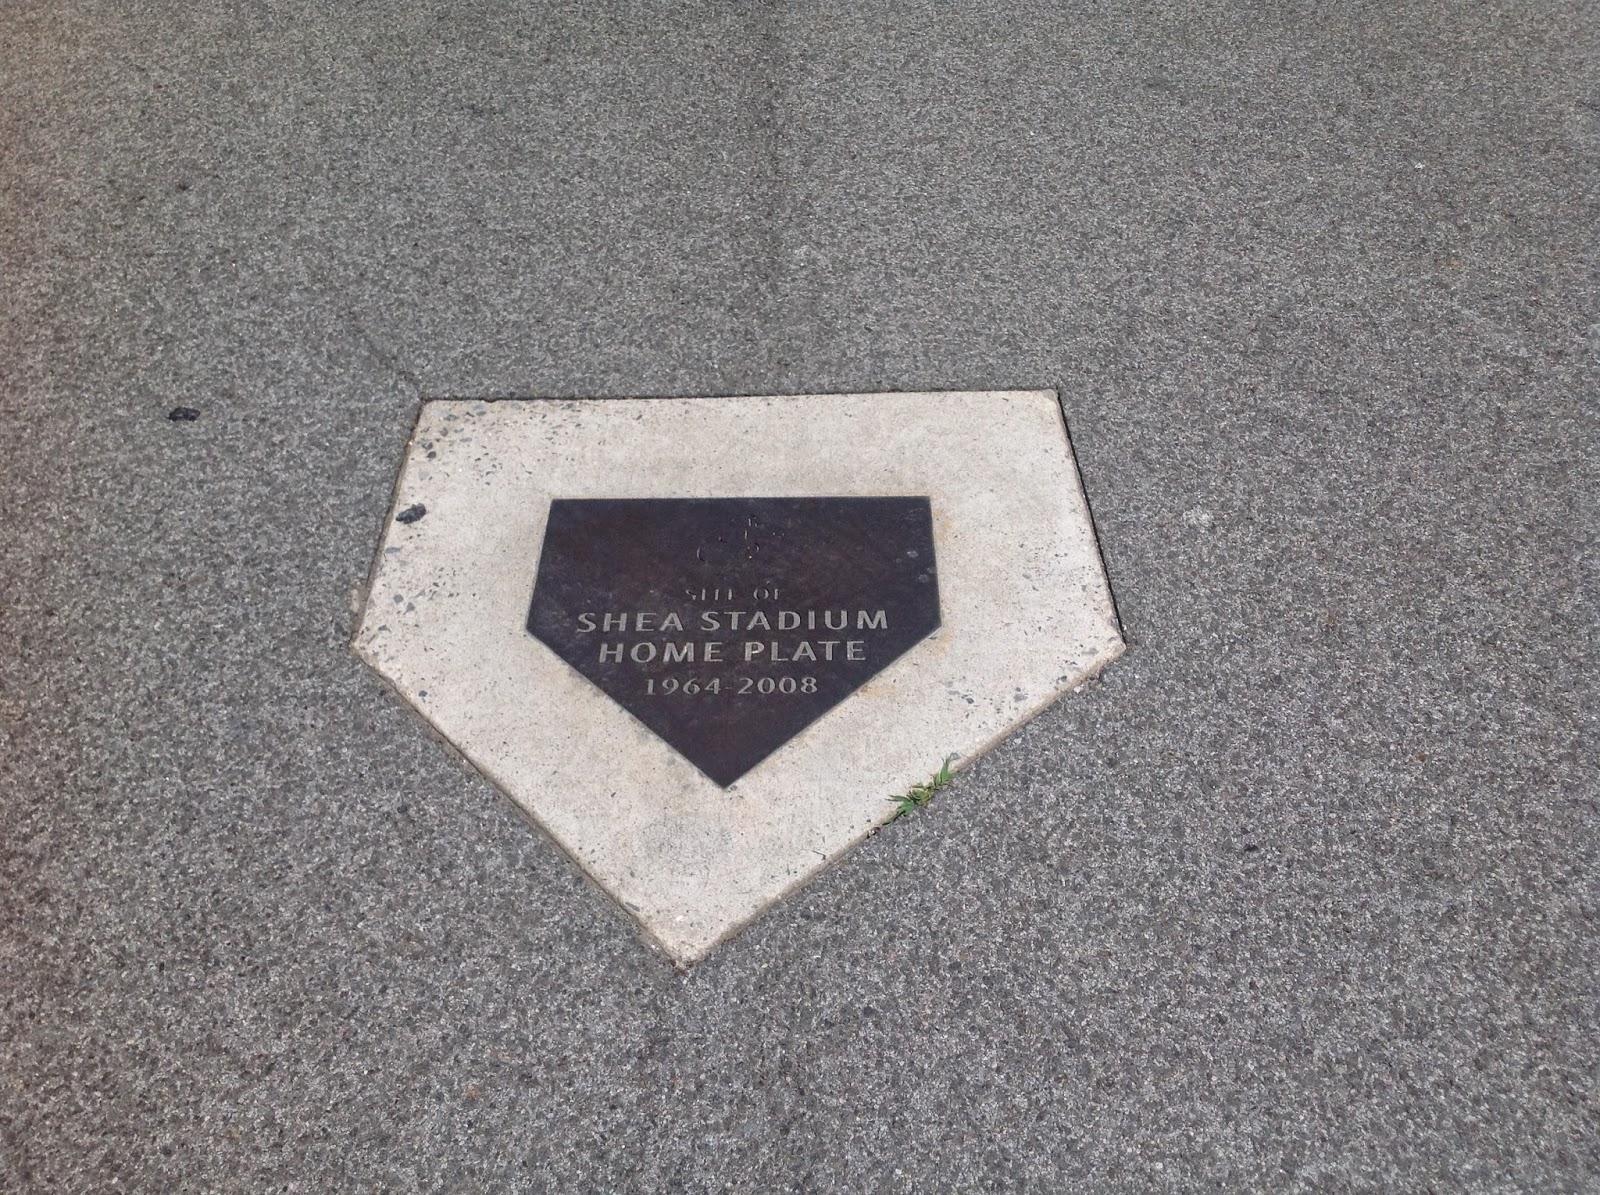 No Such Thing As Was: Heritage Field, Ernie Harwell, and a parking lot:  Baseball's Past Remembered Differently